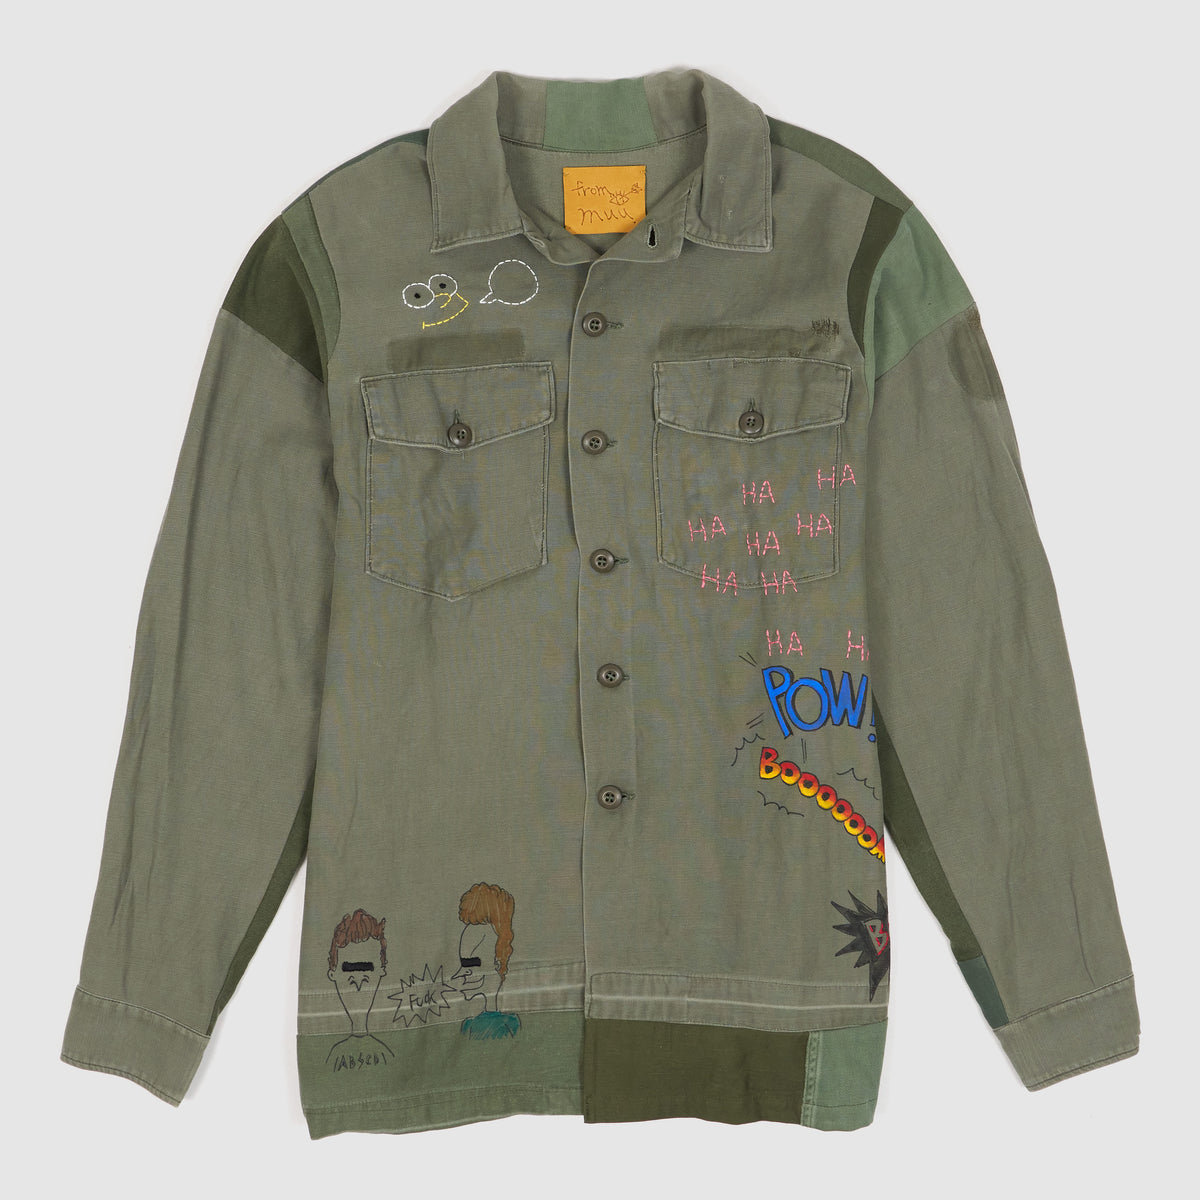 From Muu Army Overshirt Cartoon Paintings and Hand Embroidered